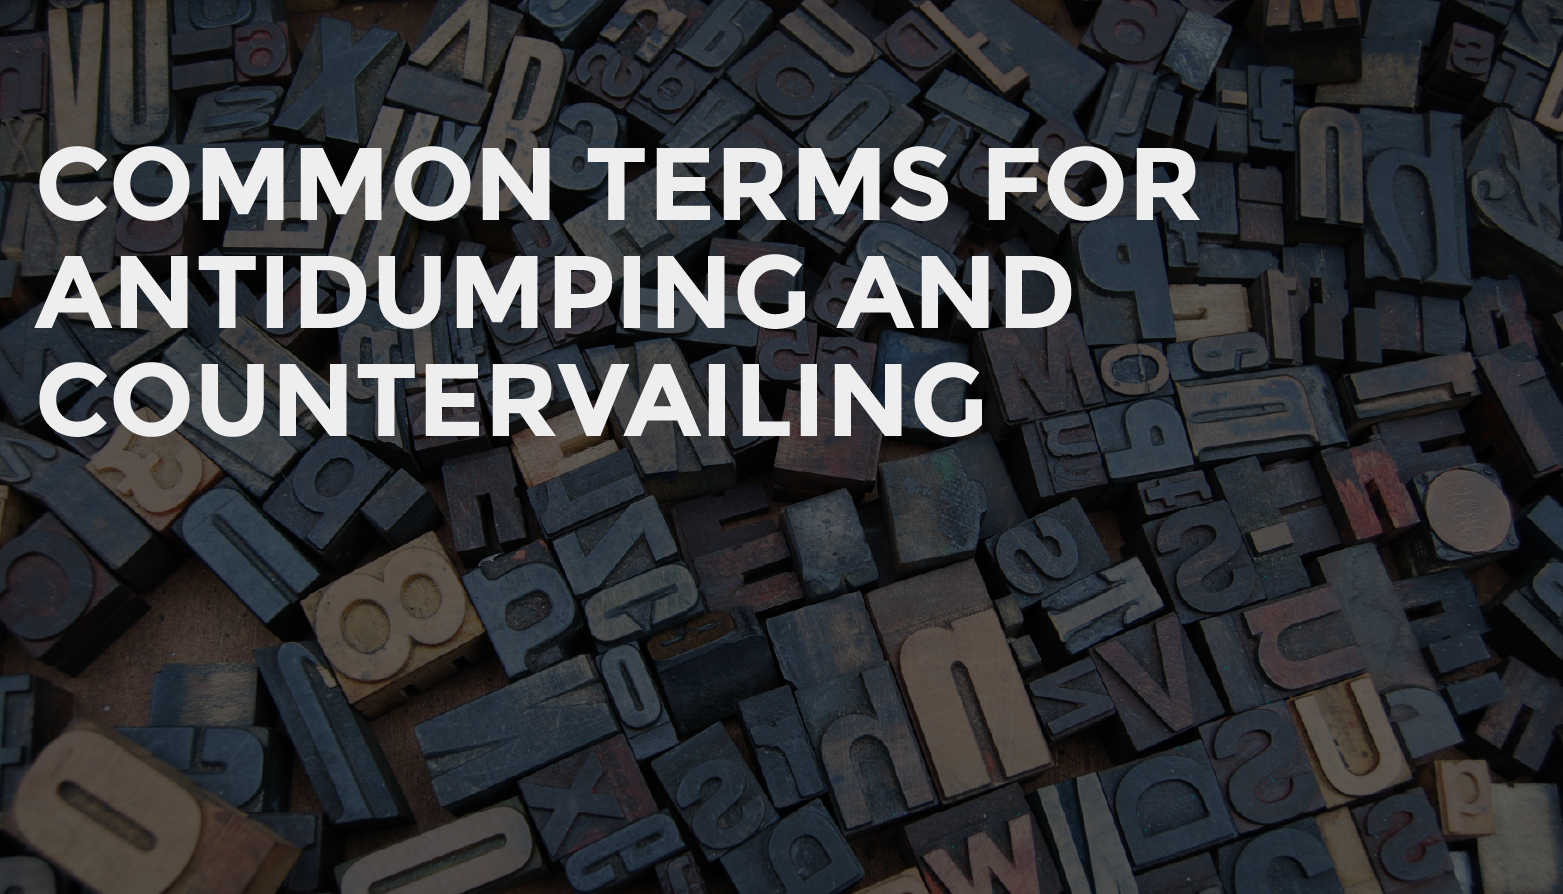 Learn some common terms used when discussing antidumping and countervailing.